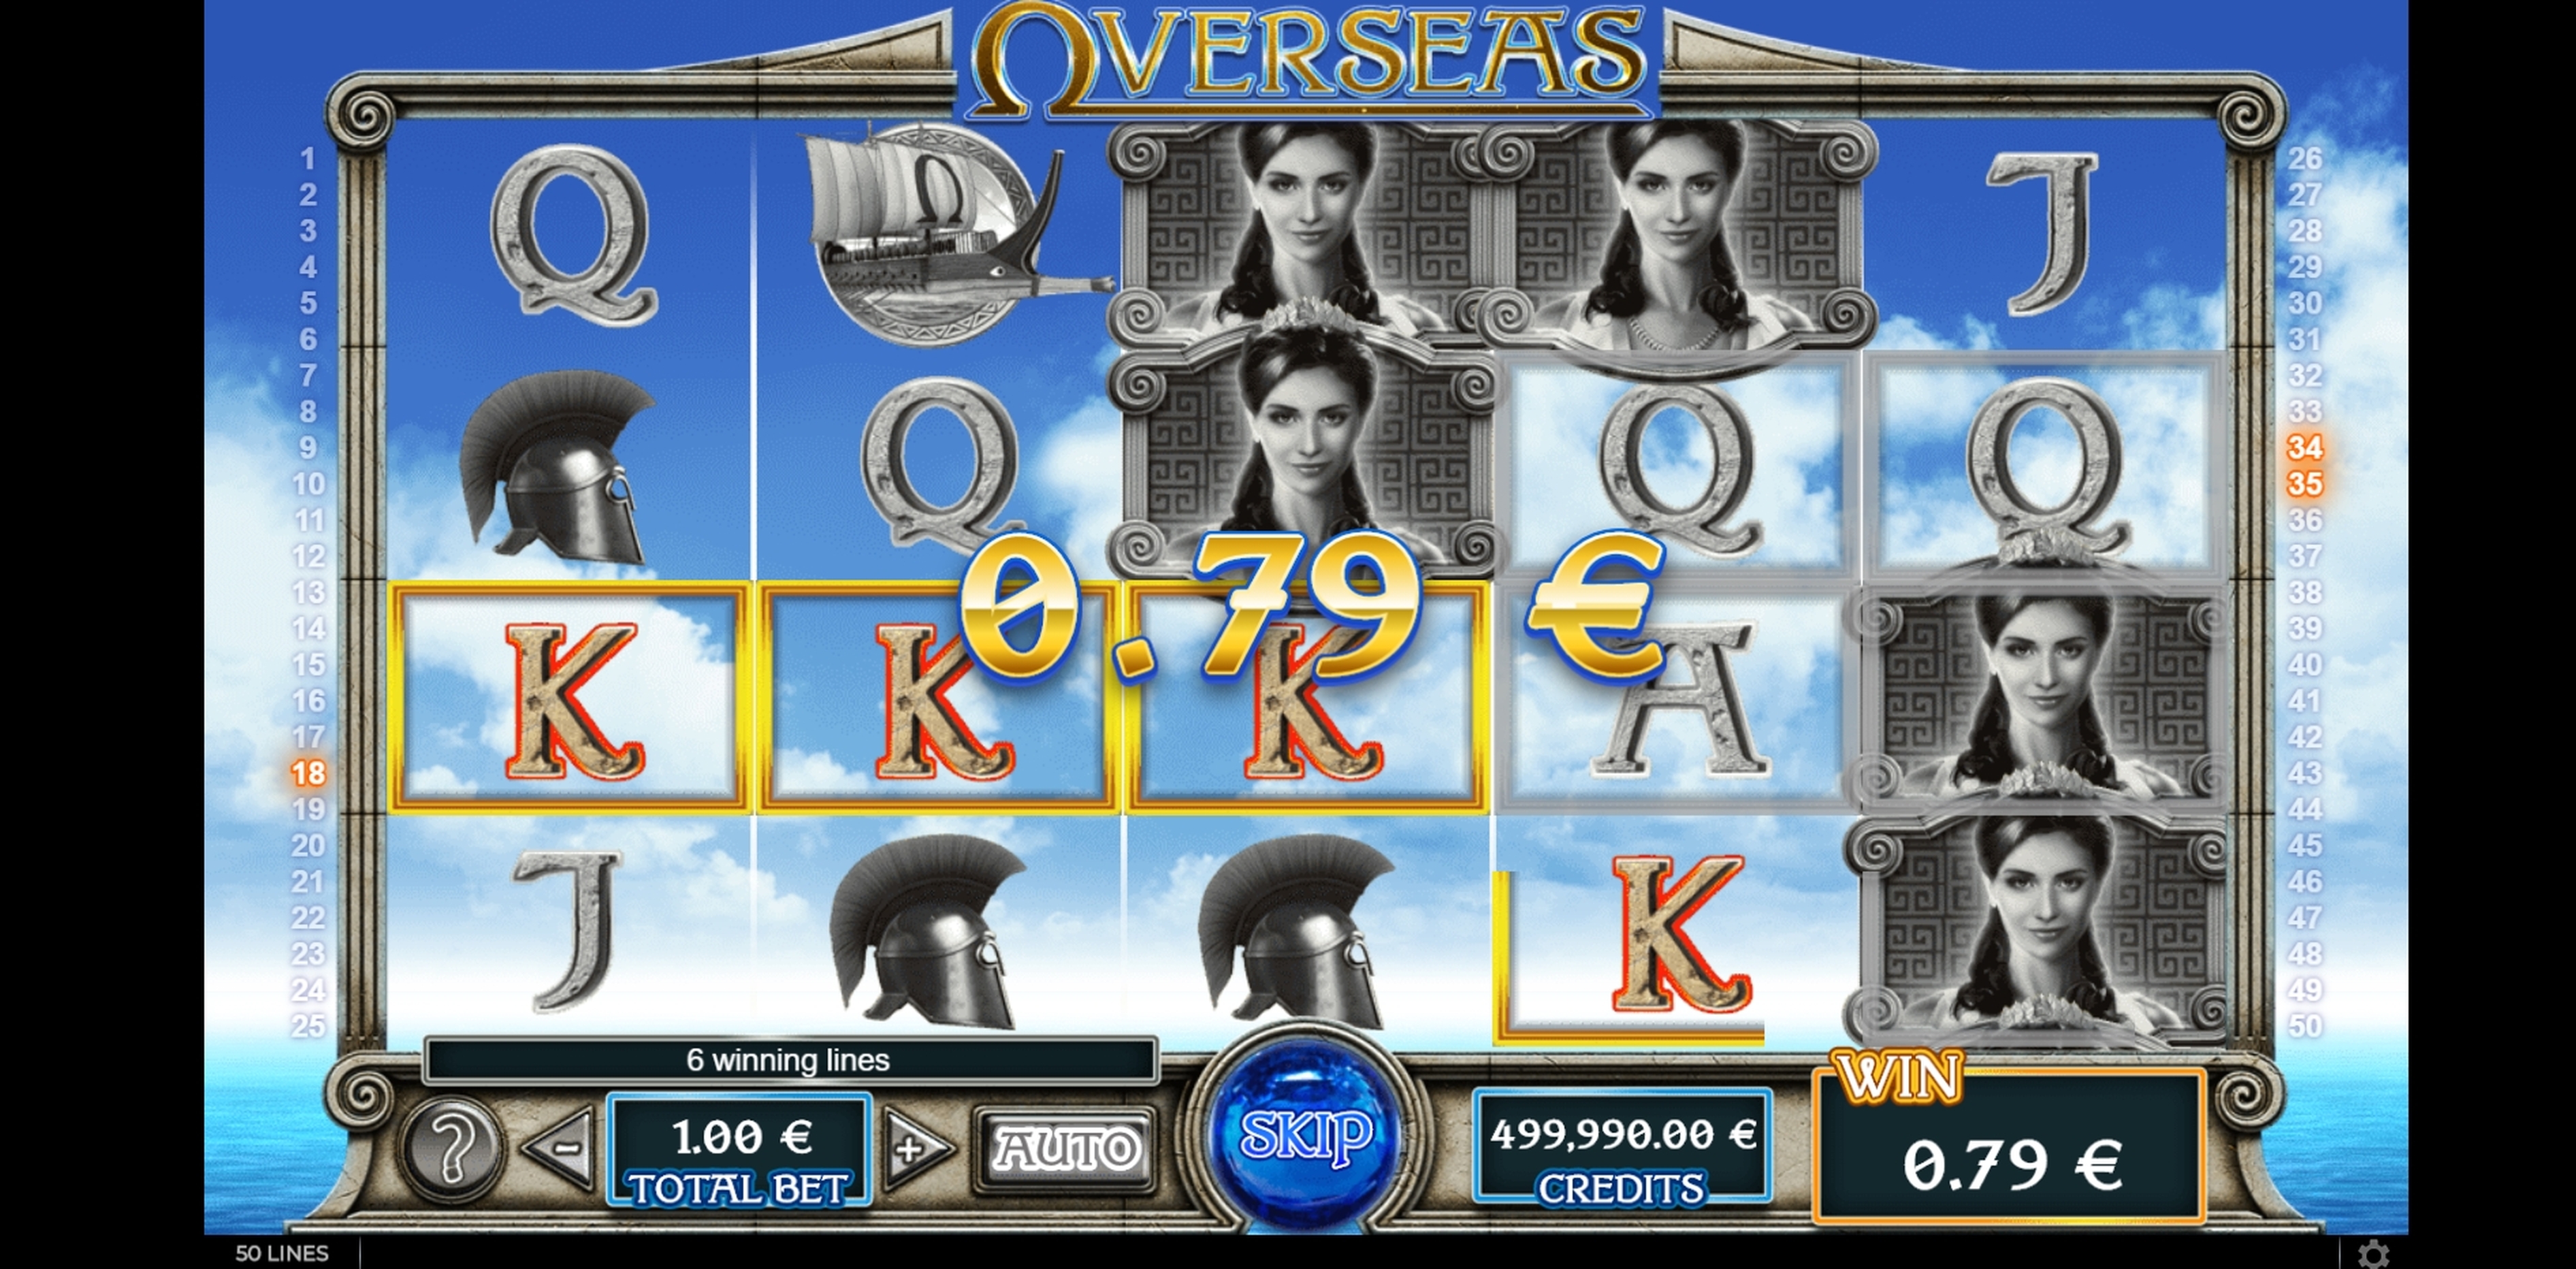 Win Money in Overseas Ulysses Odyssey Free Slot Game by GAMING1